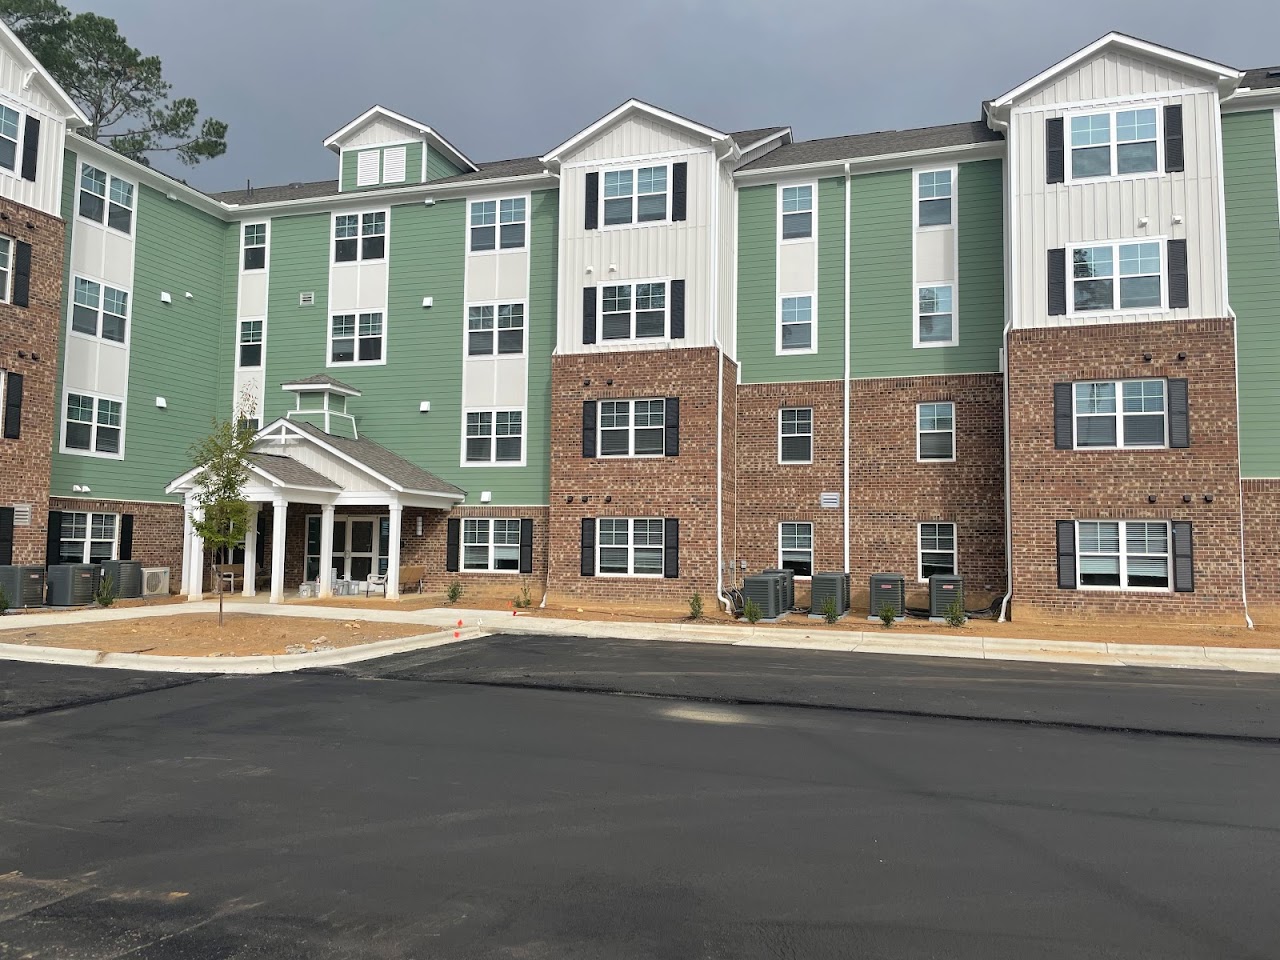 Photo of CRENSHAW TRACE. Affordable housing located at 987 DURHAM ROAD WAKE FOREST, NC 27587